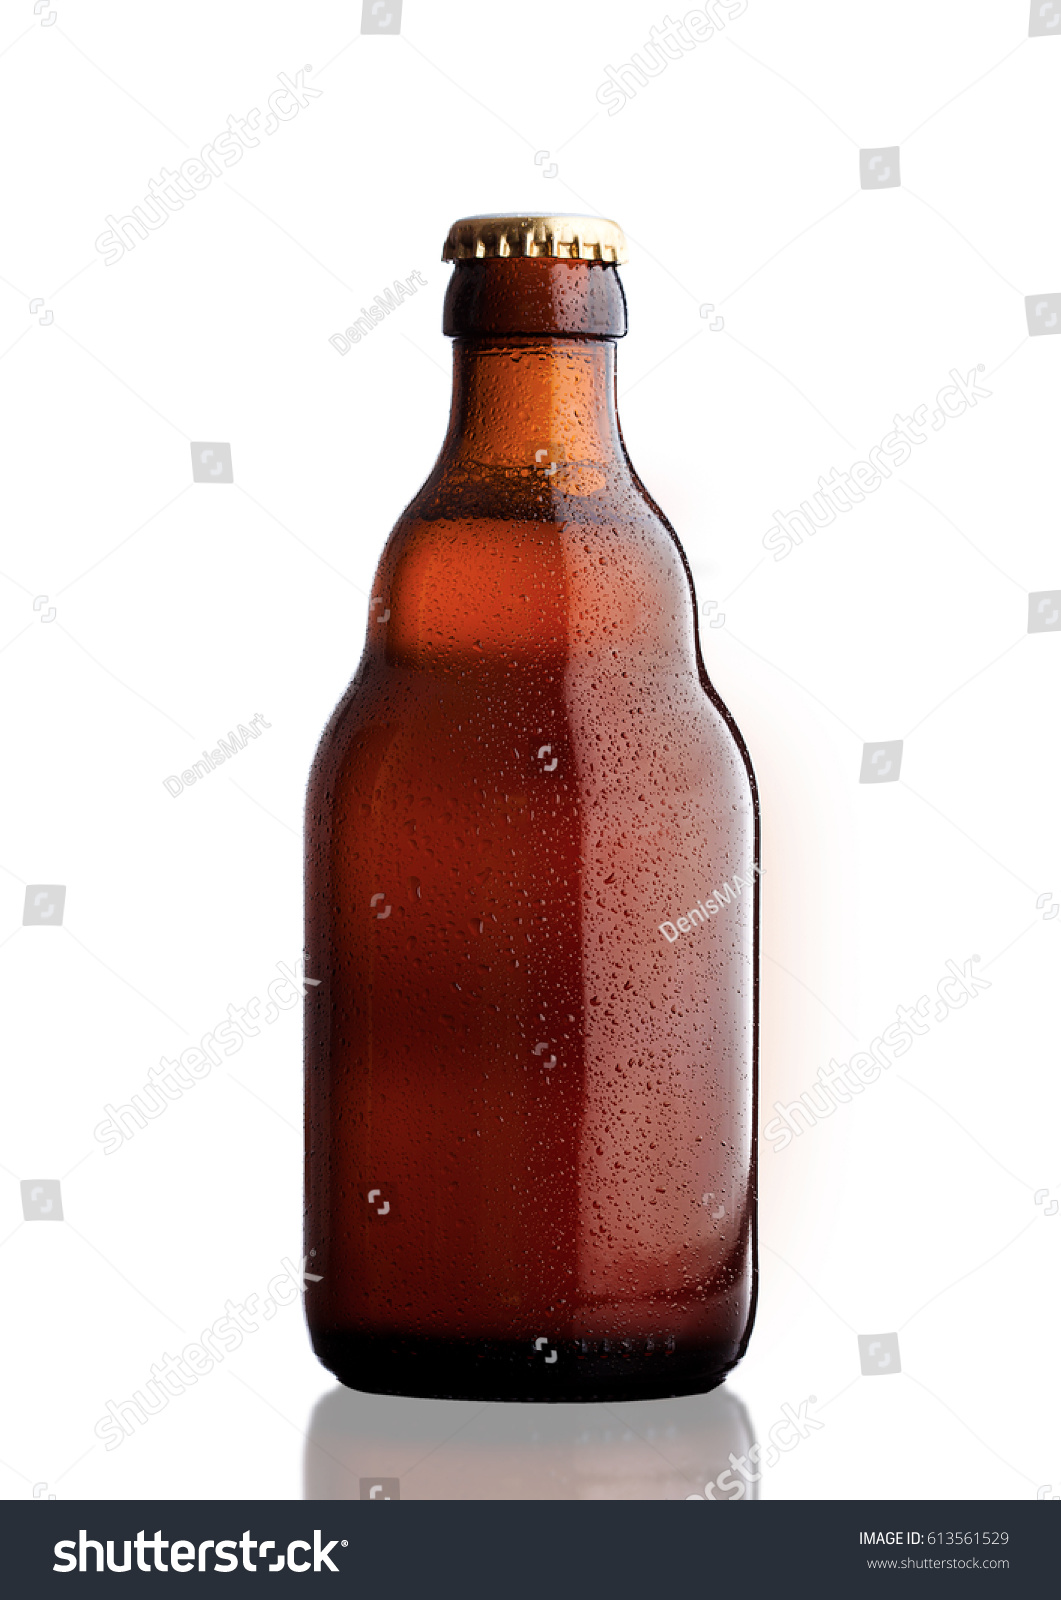 Download Brown Glass Beer Bottle Yellow Cap Stock Photo Edit Now 613561529 PSD Mockup Templates